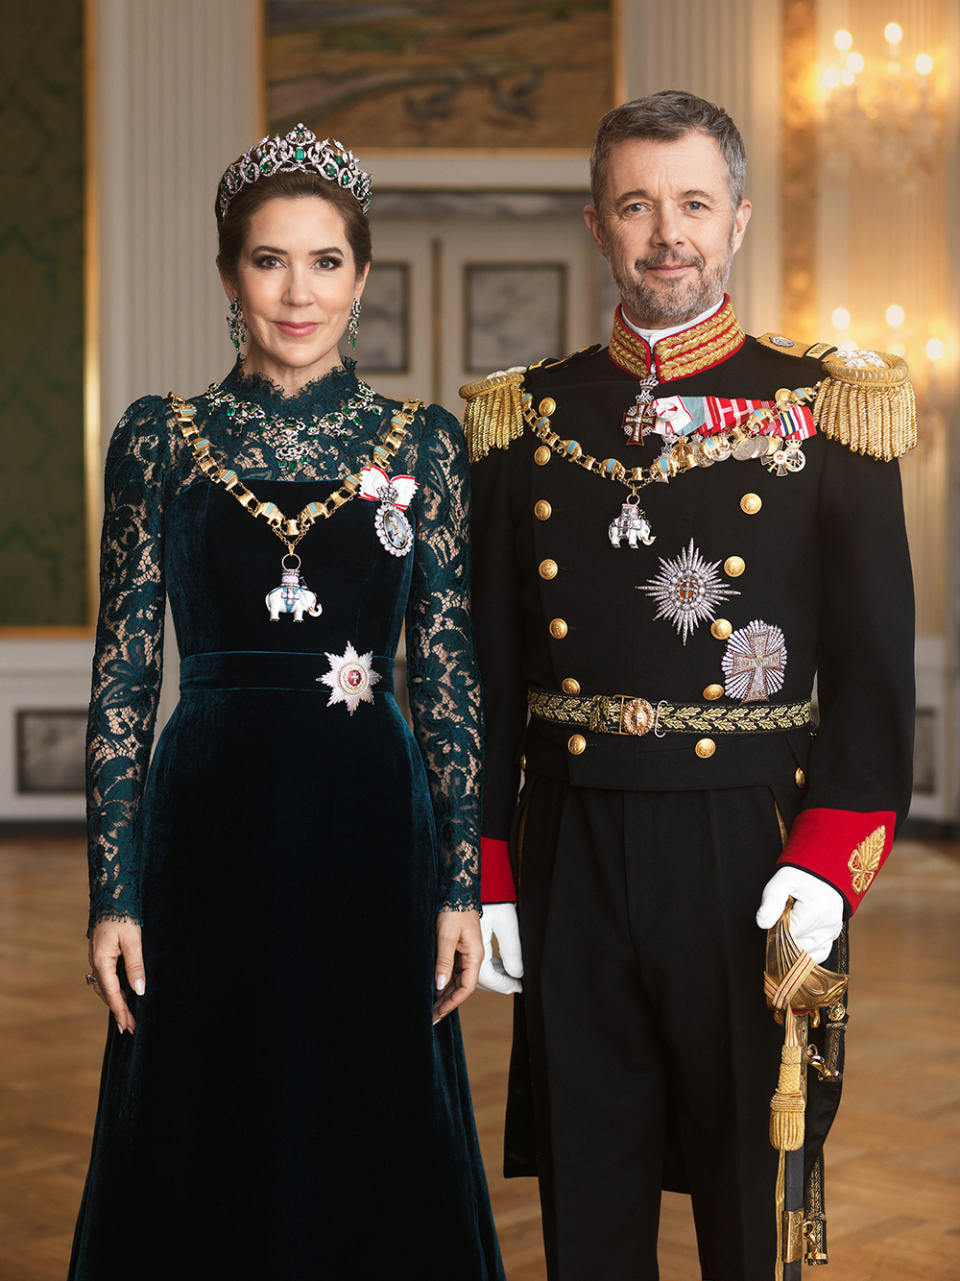 Queen Mary and King Frederik X of Denmark, royal portrait